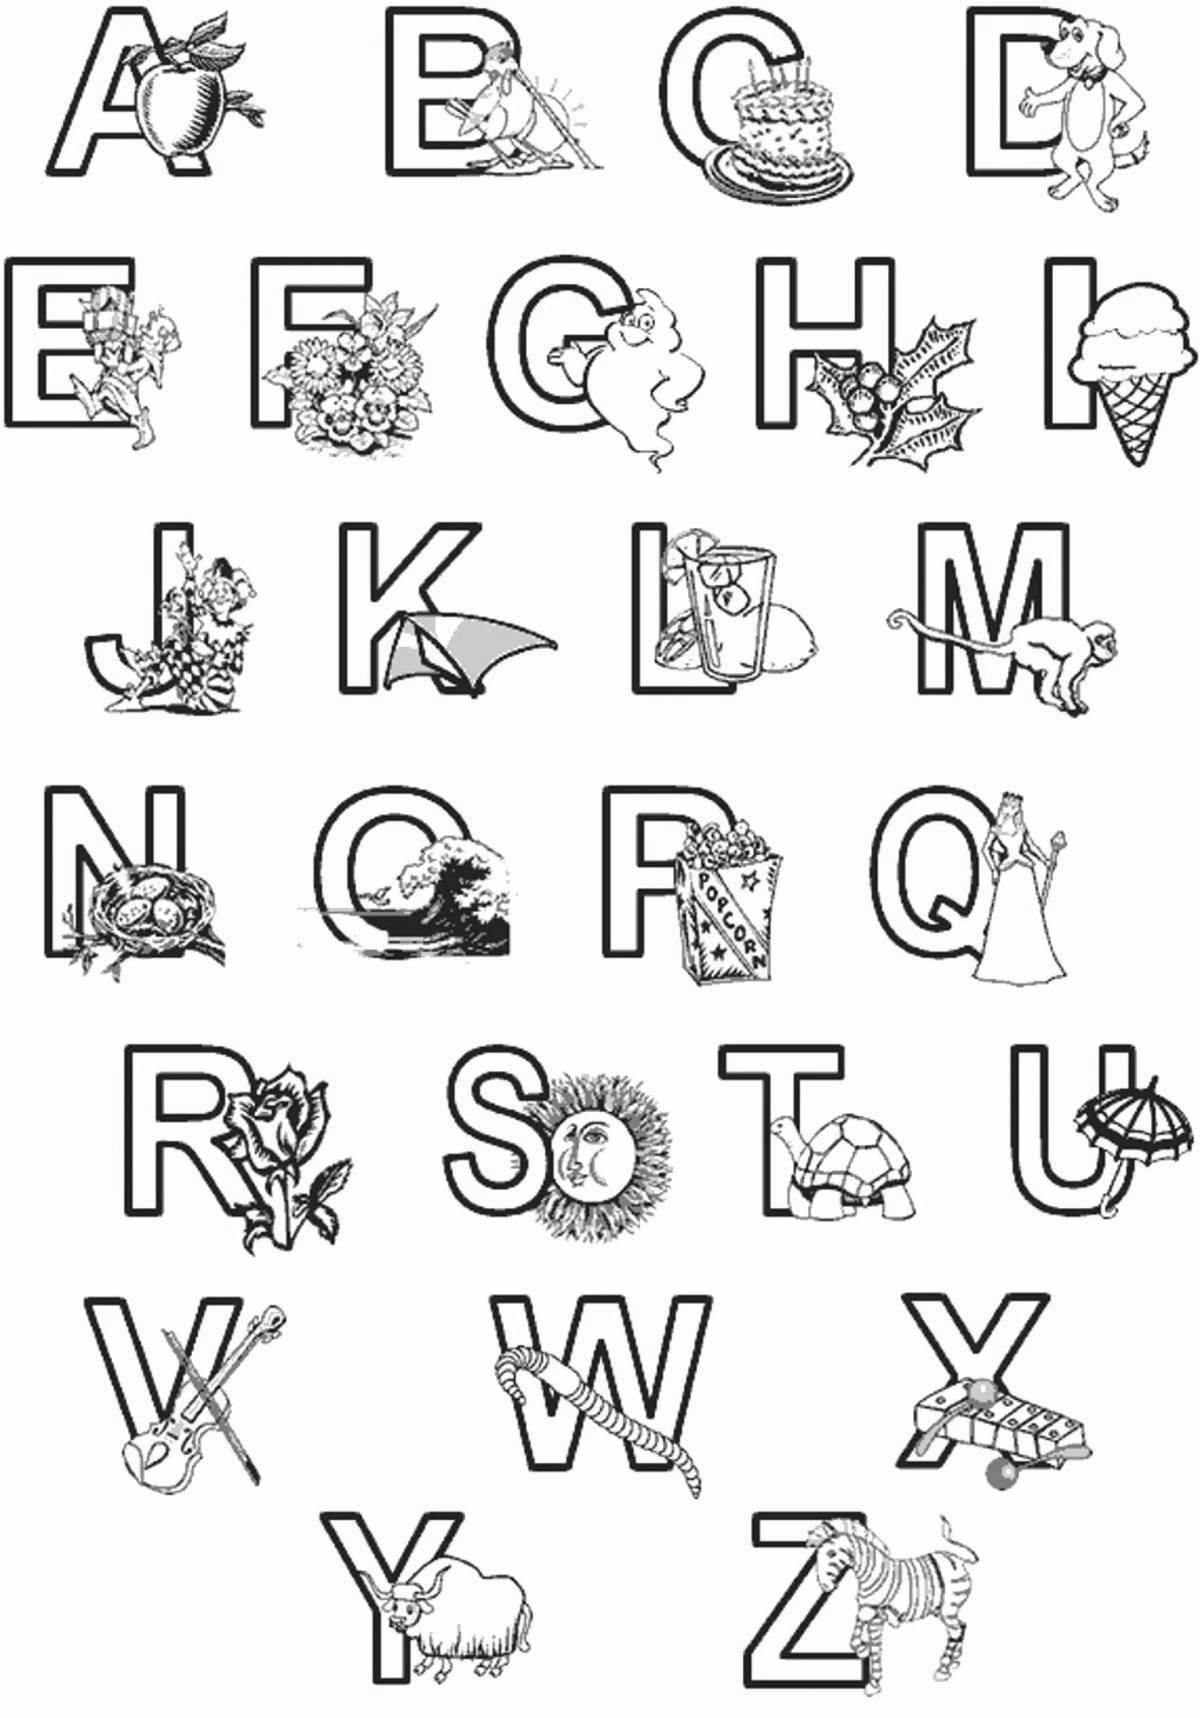 Colorful english alphabet coloring page for kids of all sizes